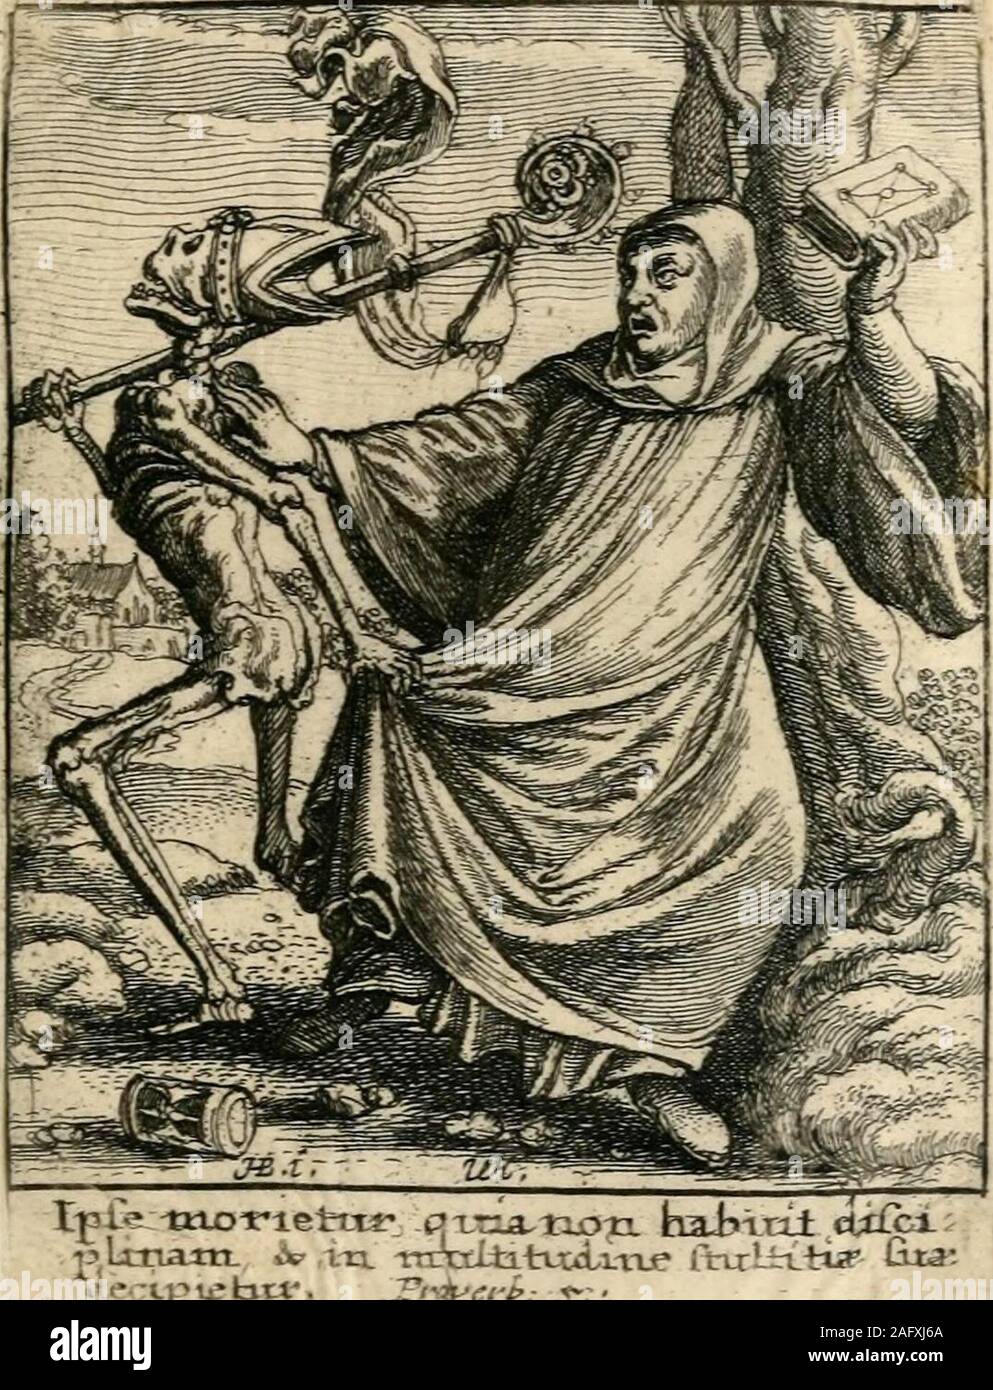 . The dance of death. ivmtn. omaiia- njeqite ctxiixeo ctcicenc?Ei 53 THE NOBLEMAN. XII. DEATH, in the character of a raggedand oppressed peasant, has despoiled thenoblemen of his paraphernalia, and is dash-ing his shield or coat of arms to pieces. Onthe ground lie scattered a helmet, crest, andflail. E3 54 THE ABBOT. XIII. DEATH, in a very ludicrous attitude,^vith the Abbots mitre on his head, and hiscrosier on his shoulder, has seized him by thecloak, whilst the other endeavours to disen-gage himself, and appears to be throwing hisbreviary at his assailant. If Hollar copiedthe original wooden Stock Photo